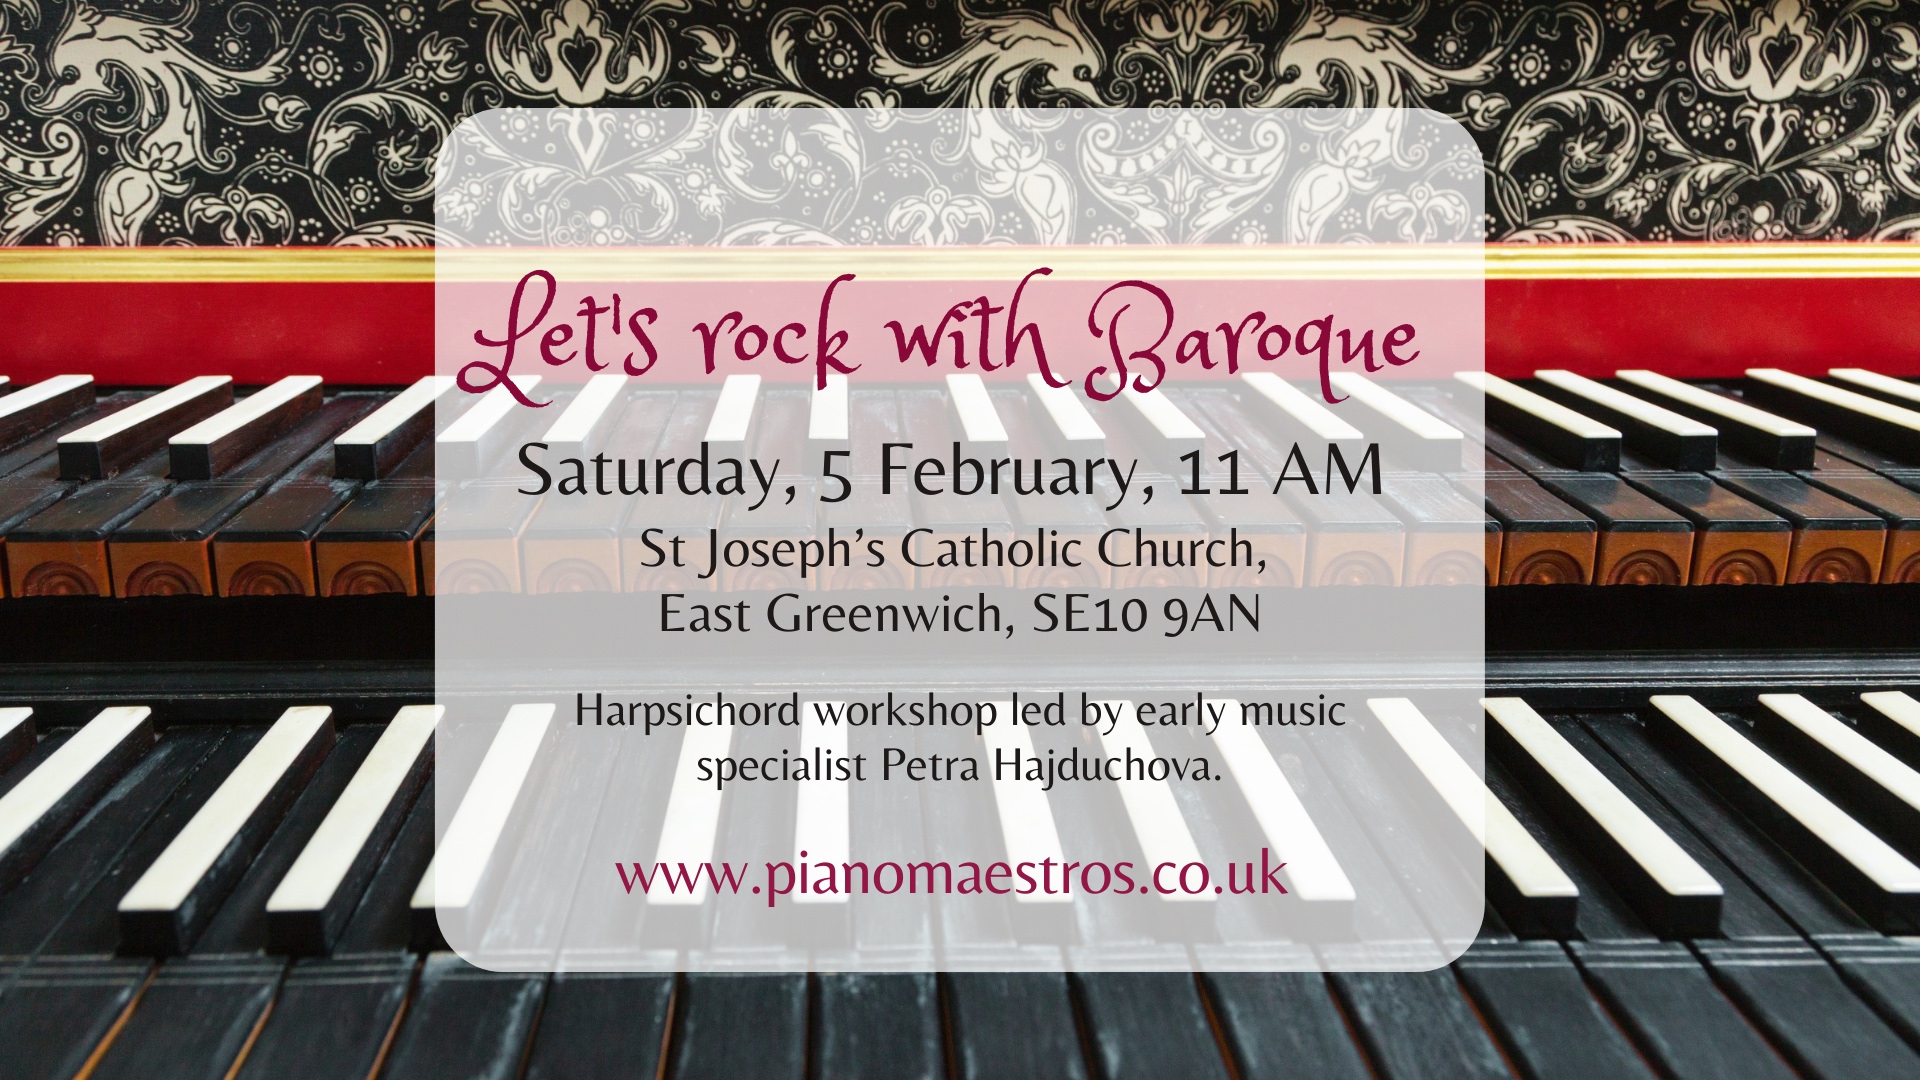 Join us for an interactive workshop on baroque music, and learn all about the big brother of piano - the harpsichord.